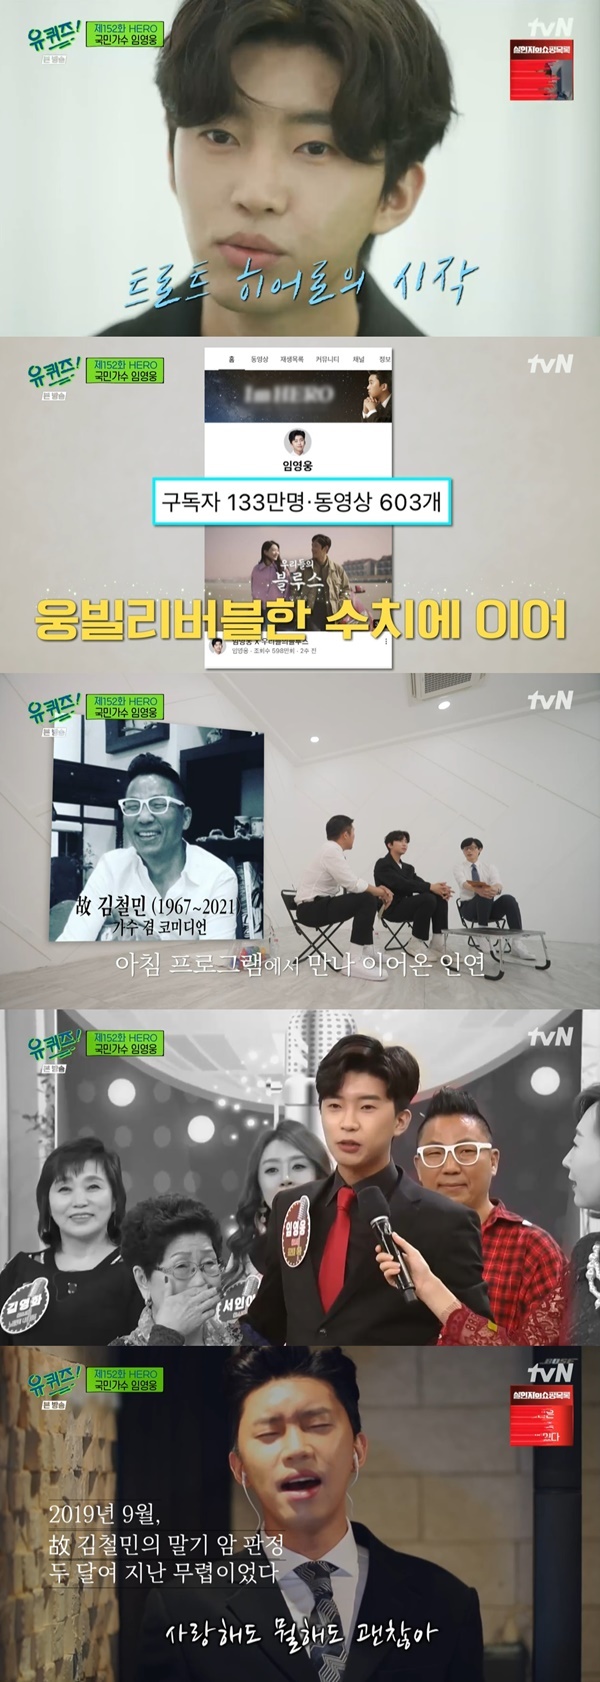 You Quiz on the Block Im Young-wong revealed his relationship with the late Kim chul-min.Singer Im Young-wong appeared and talked in the TVN entertainment program You Quiz on the Block (hereinafter referred to as Yu Quiz), which was broadcast on the evening of the 4th.Ive been debuting this year for six years.I have been thinking about singers a little bit since my friends told me that I was singing in the neighborhood since I was a child, he said. I dreamed of becoming a singer while attending a practical music institute in my third year of high school.After graduating from college, it is not easy to enter the company and it is not easy. It is not a singer soon, he added.Yoo Jae-Suk confessed, I was shocked by the fact that there were too many new people besides Sunbather who I knew when I saw Song Stage.Im Young-woong said, In fact, I think that Trot is once again loved, but Trot has no visionary period. I was always loved.Im Young-woong also said, Trot has never been loved for a moment, and I have always been around and have been in contact with him.In addition, Im Young-woong said, My mother likes trots. She likes exciting songs, so she played a lot of them. I also came across a lot of naturally in the car.So I think it was natural to enter the trot. In addition, the YouTube channel operated by Im Young-woong was mentioned.Im Young-woongs YouTube channel, which has been operating since the days of unknown singers, has a total of 1.3 billion views and has 603 videos.Im Young-woong said: When I first started YouTube, there was nothing I could do.I made my debut as a trot singer, but there was no one to call me, and there was no stage, so I just uploaded the video taken in the studio steadily.Among them, Jo Se-ho said, In fact, I saw Im Young-wong for the first time, and I saw that he had covered the late Kim chul-min Sunbather song in a community.I remember saying, Whos that guy?Im Young-woong said, Chulmin became a relationship in AM Plaza.When I gave a new song, I thought I wanted to call and help my brother. Earlier, Im Young-woong covered the title song of the last album of the late Kim chul-min.Yoo Jae-Suk said, Thank you for your heart.Now (kim chul-min) went to heaven, but he has made a lot of real efforts to give a lot of laughter to many people in the streets for a lifetime. 